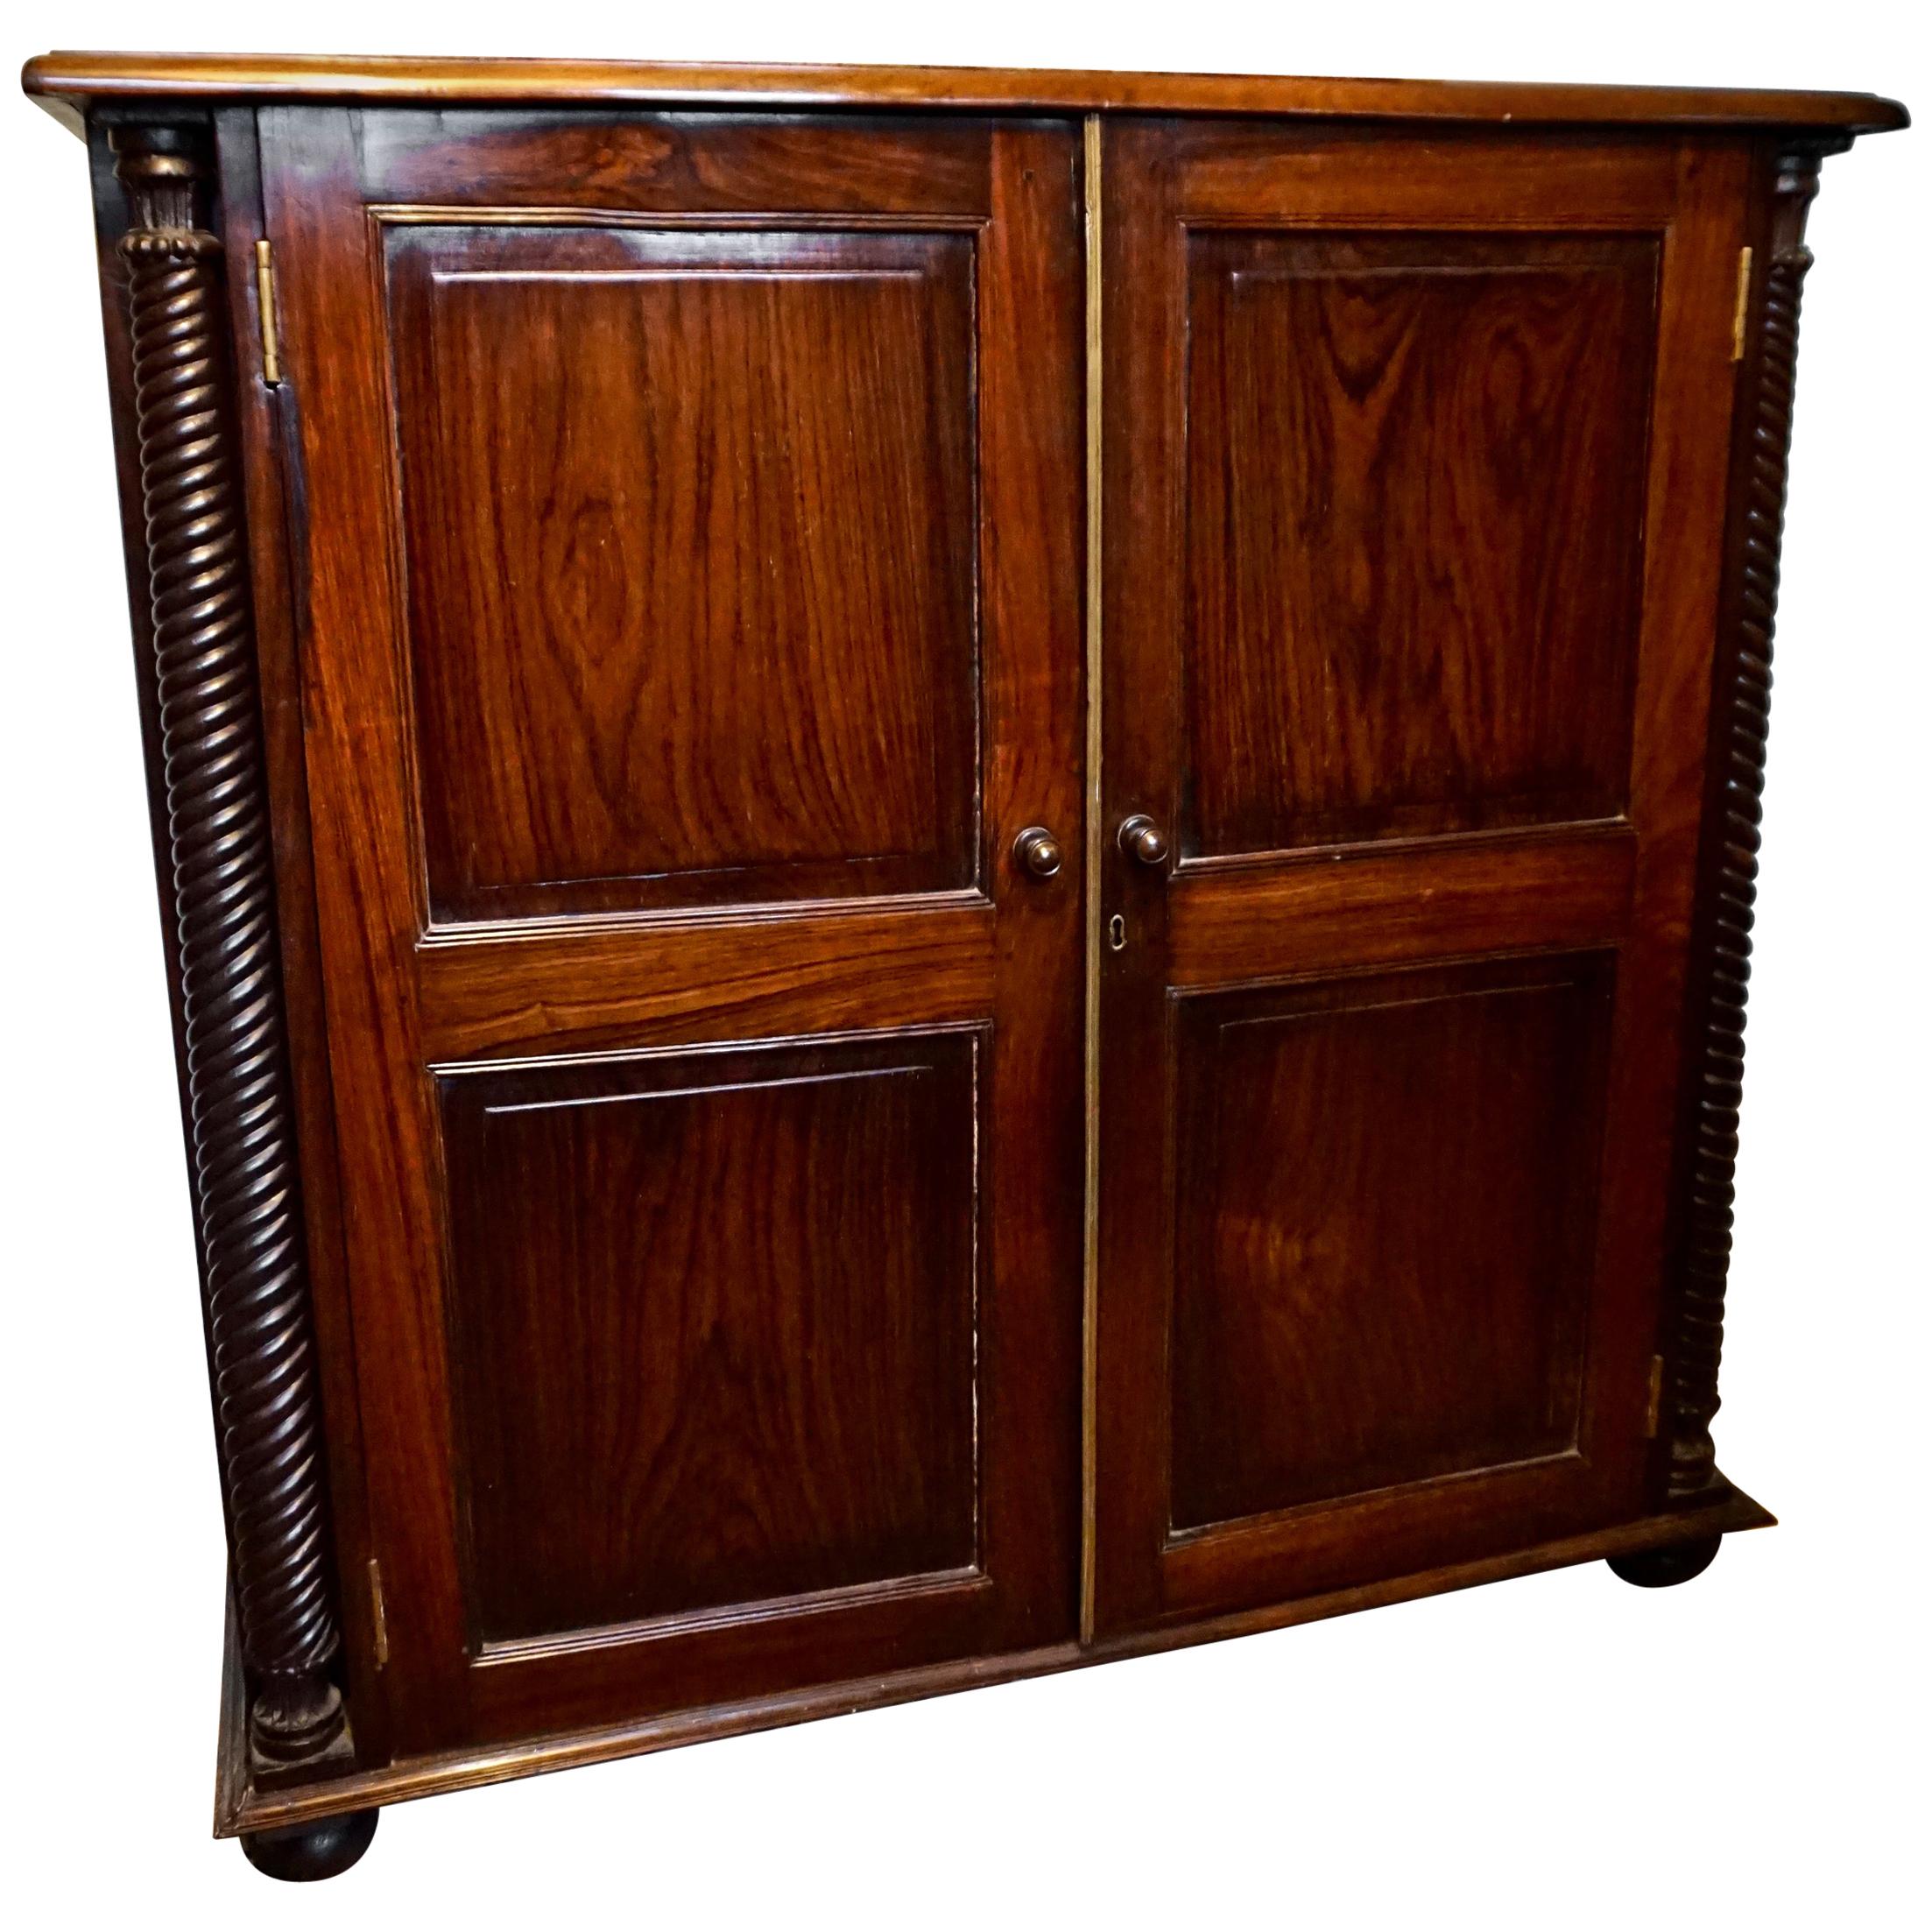 Colonial Rosewood Carved Hutch Linen Cabinet with Barley Twist Columns